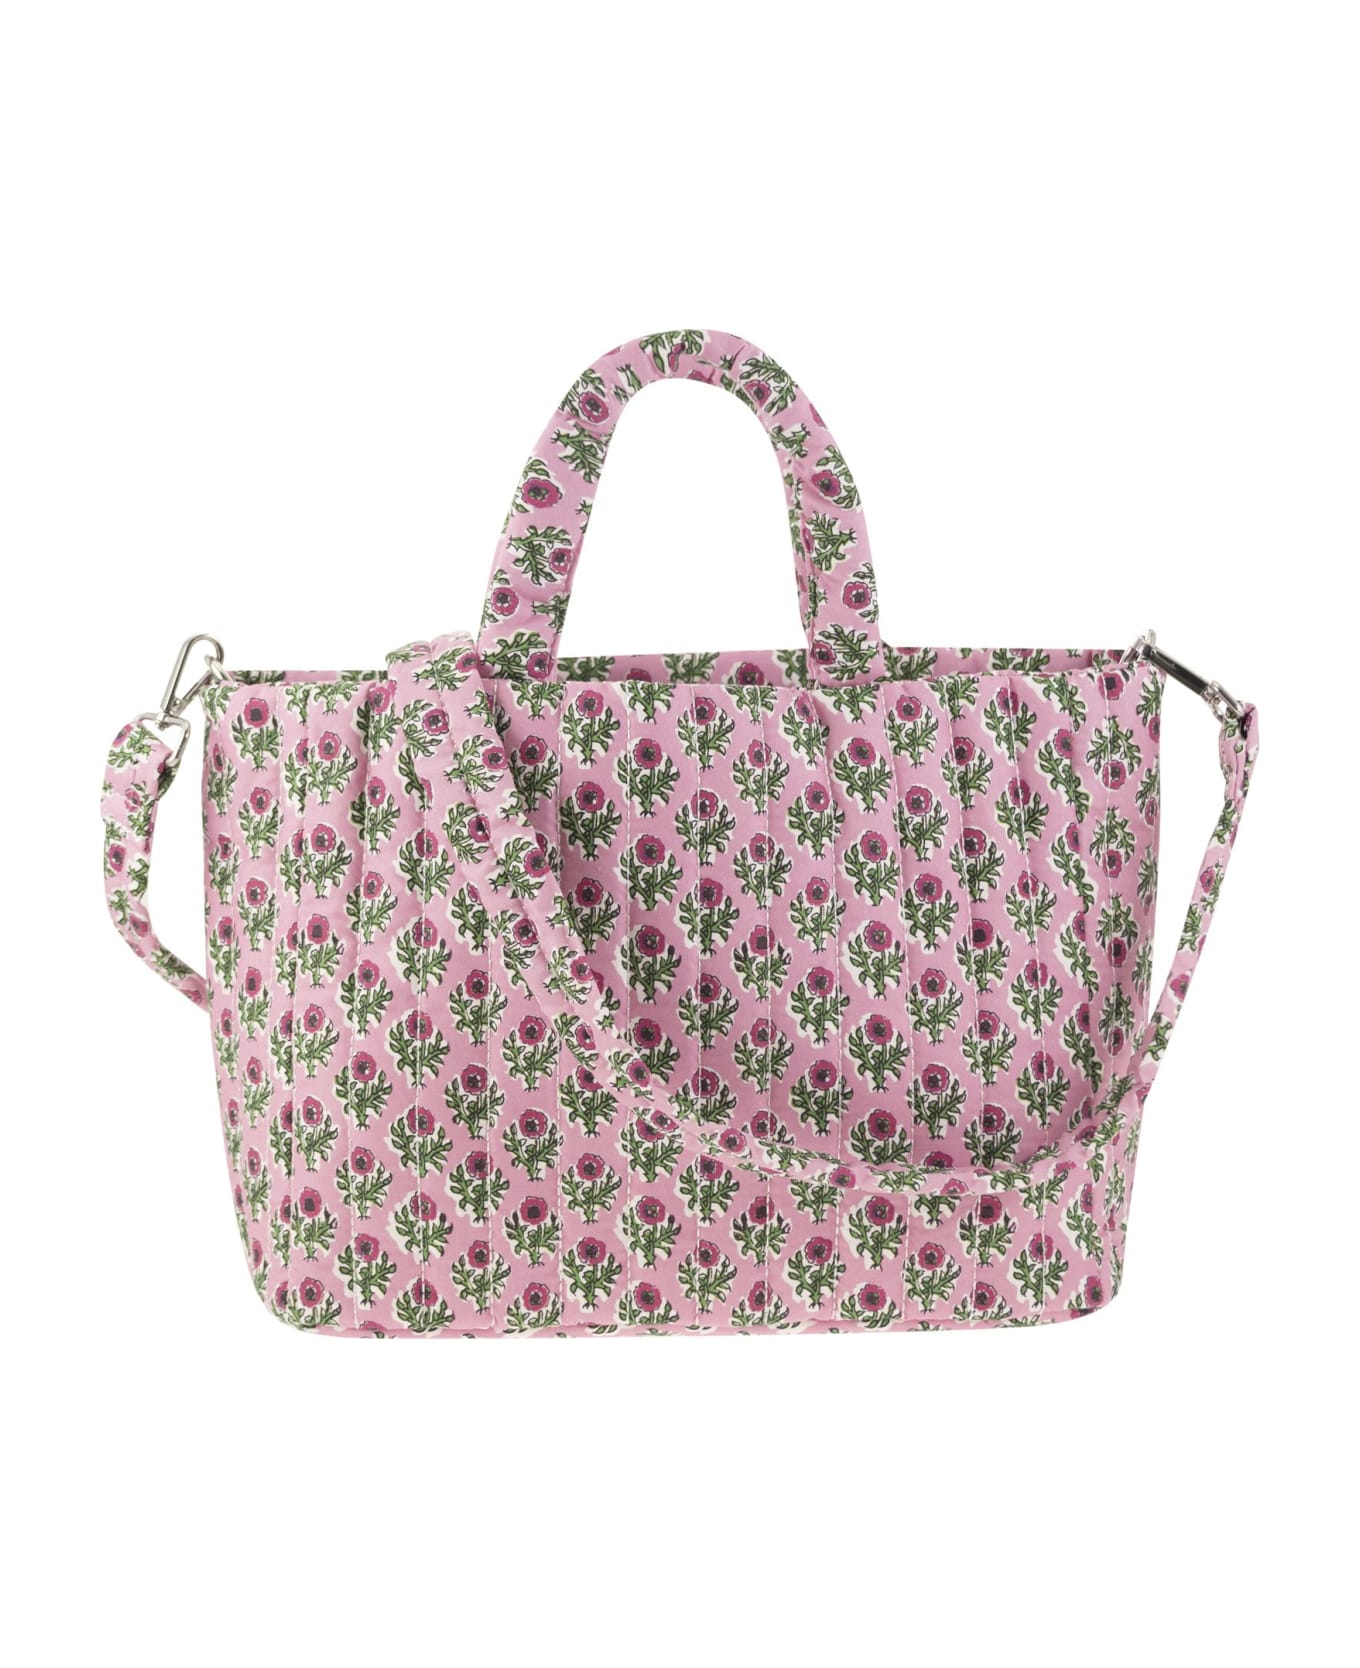 MC2 Saint Barth Soft Tote Mid Quilted Bag With Flowers - Pink トートバッグ